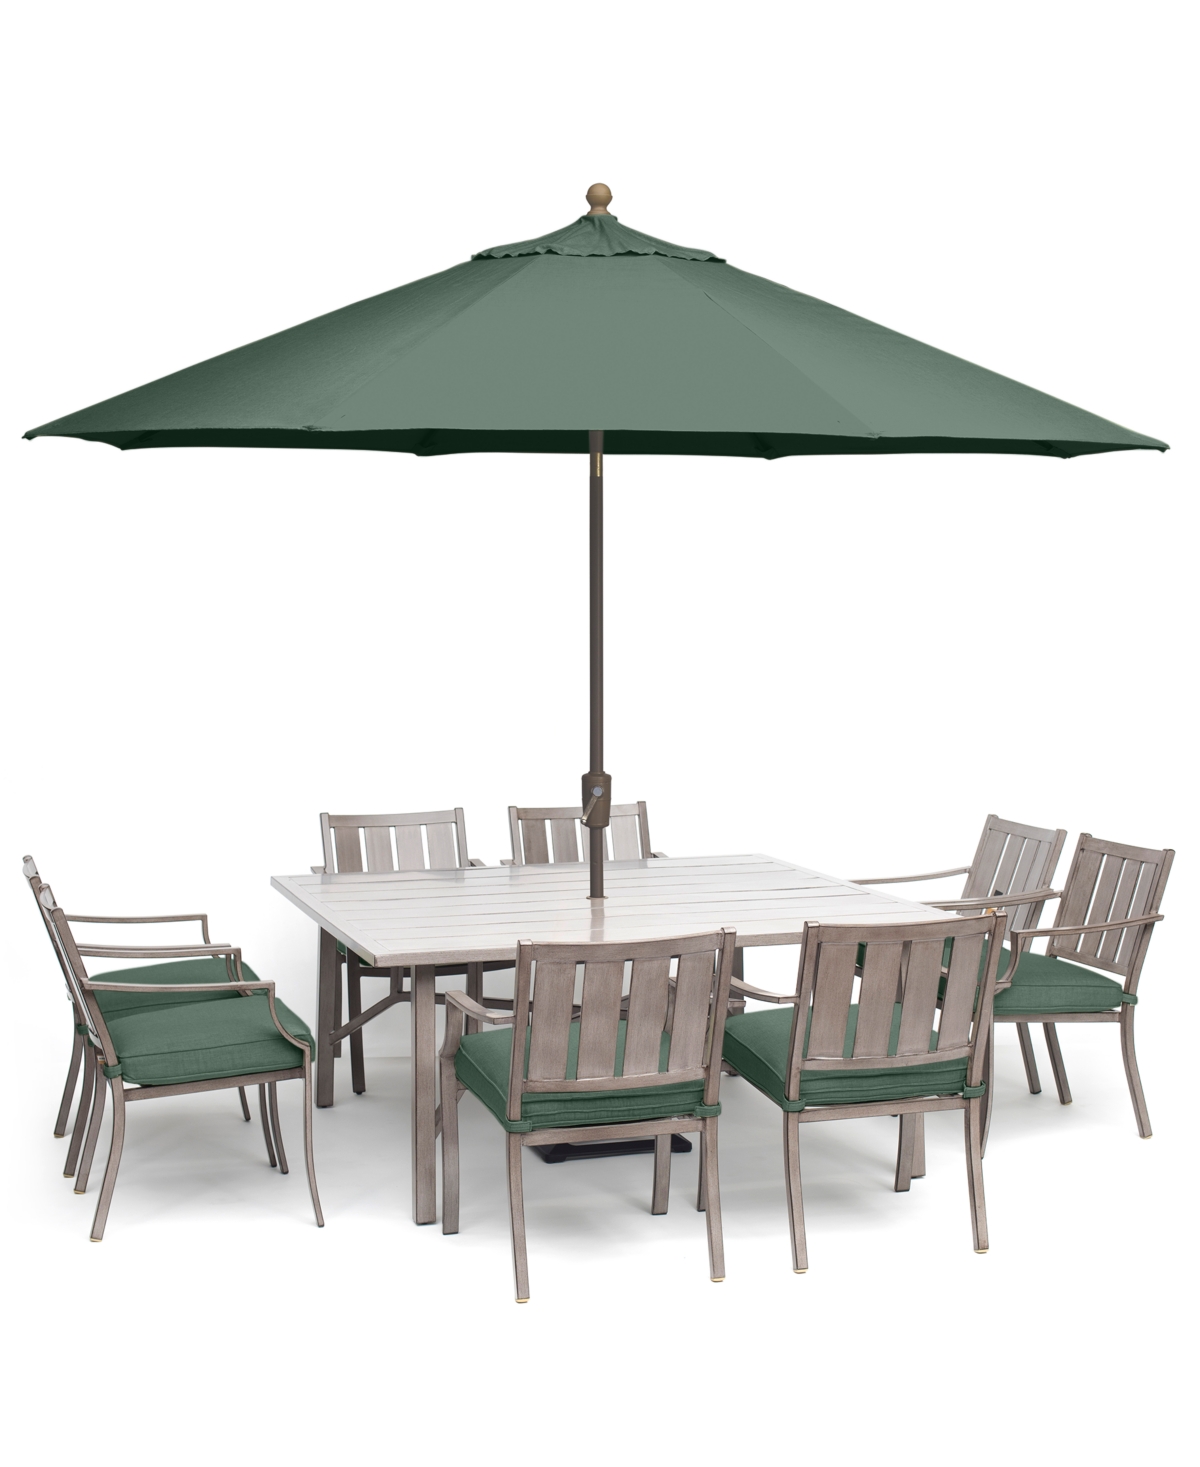 Agio Wayland Outdoor Aluminum 9-pc. Dining Set (64" Square Dining Table & 8 Dining Chairs), Created For M In Outdura Grasshopper